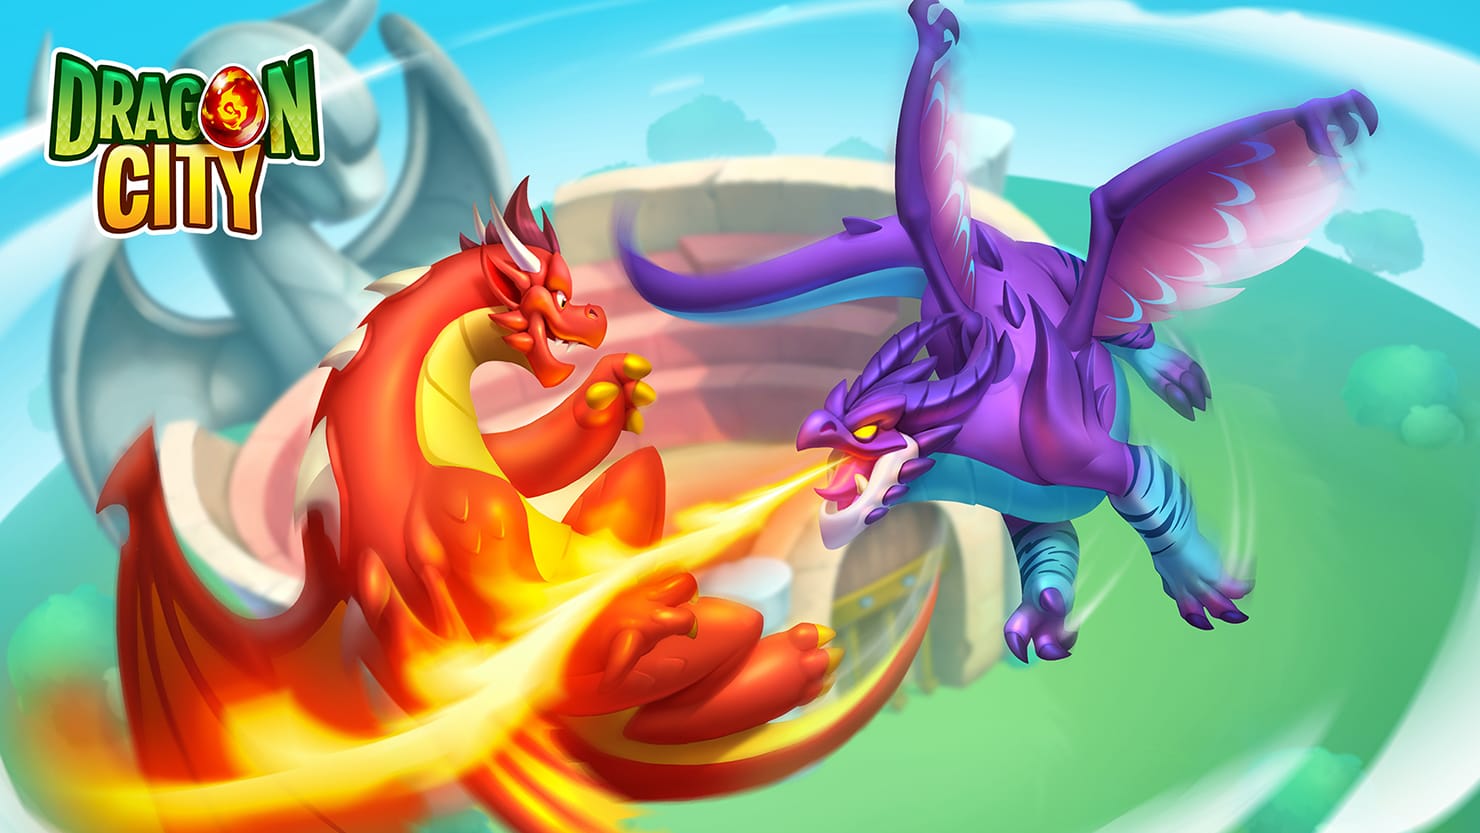 Dragon City: Discover How to Breed the Best Dragons